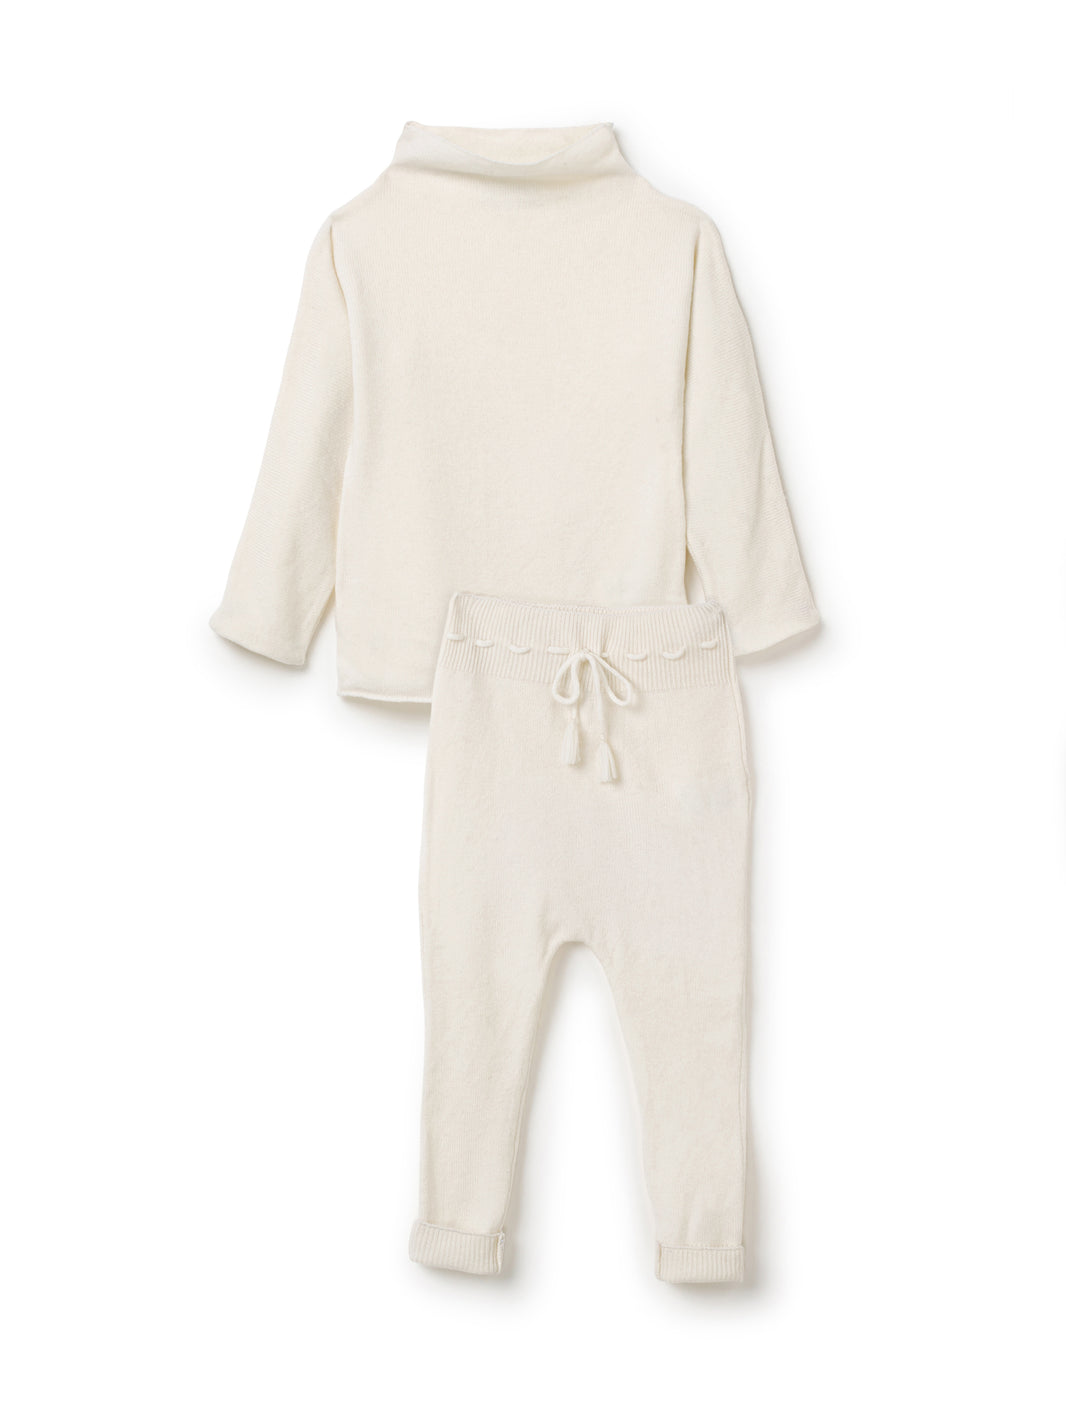 Luxurious Baby Clothing & Accessories | Babywear | Belle Enfant